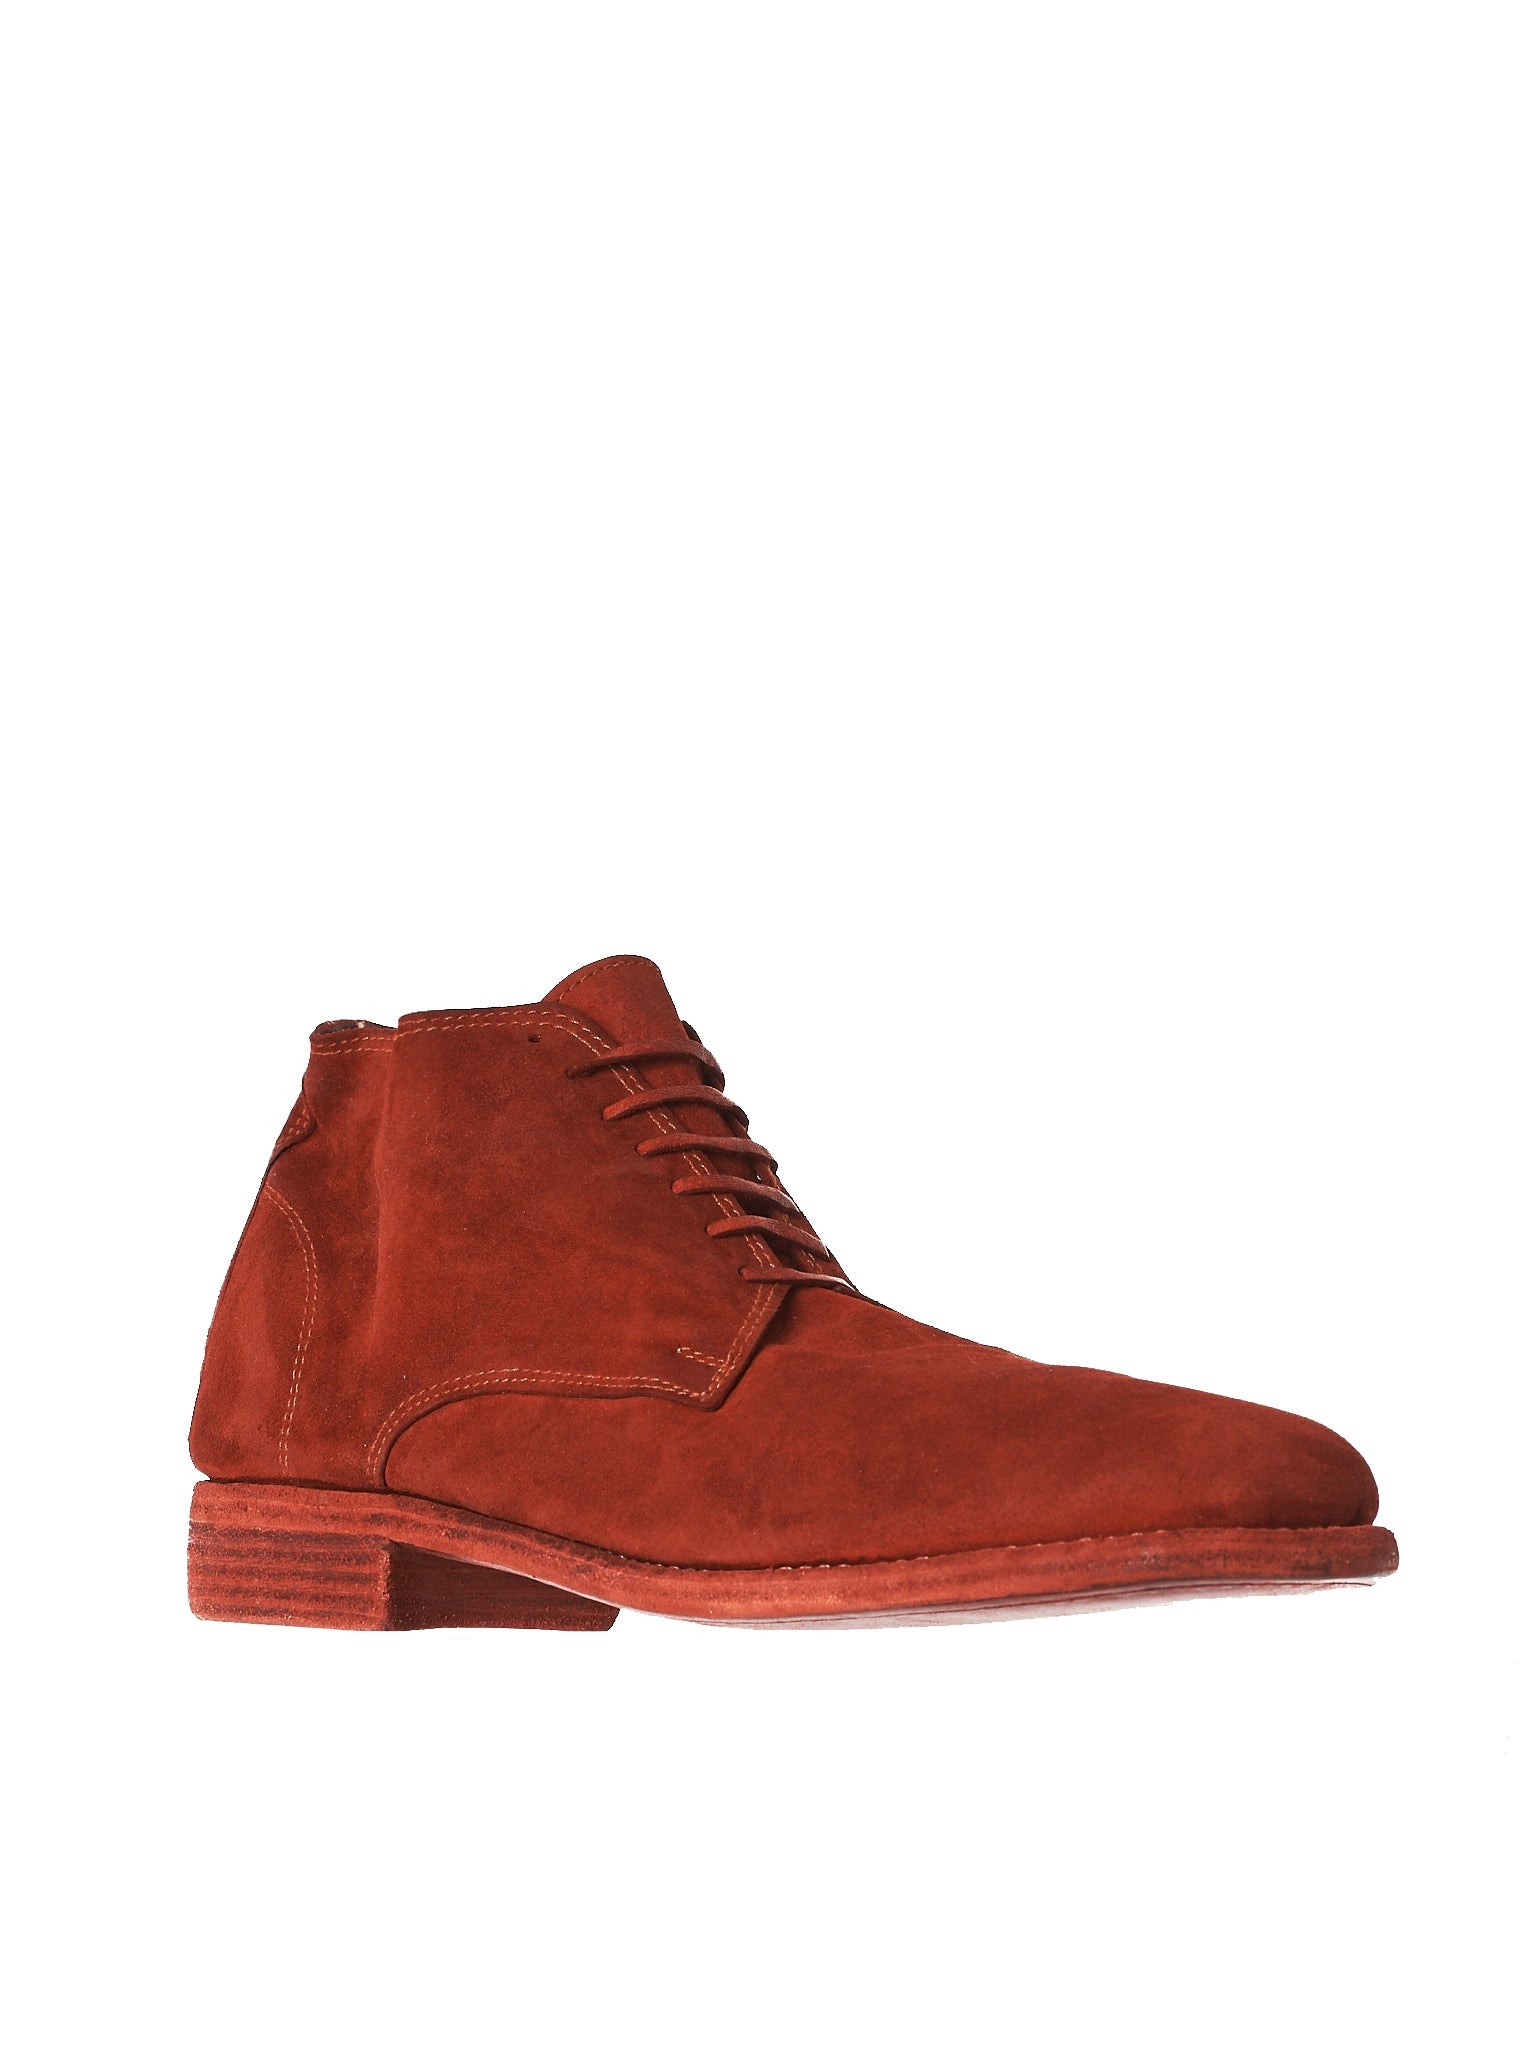 Suede Dyed Leather Boots - 2